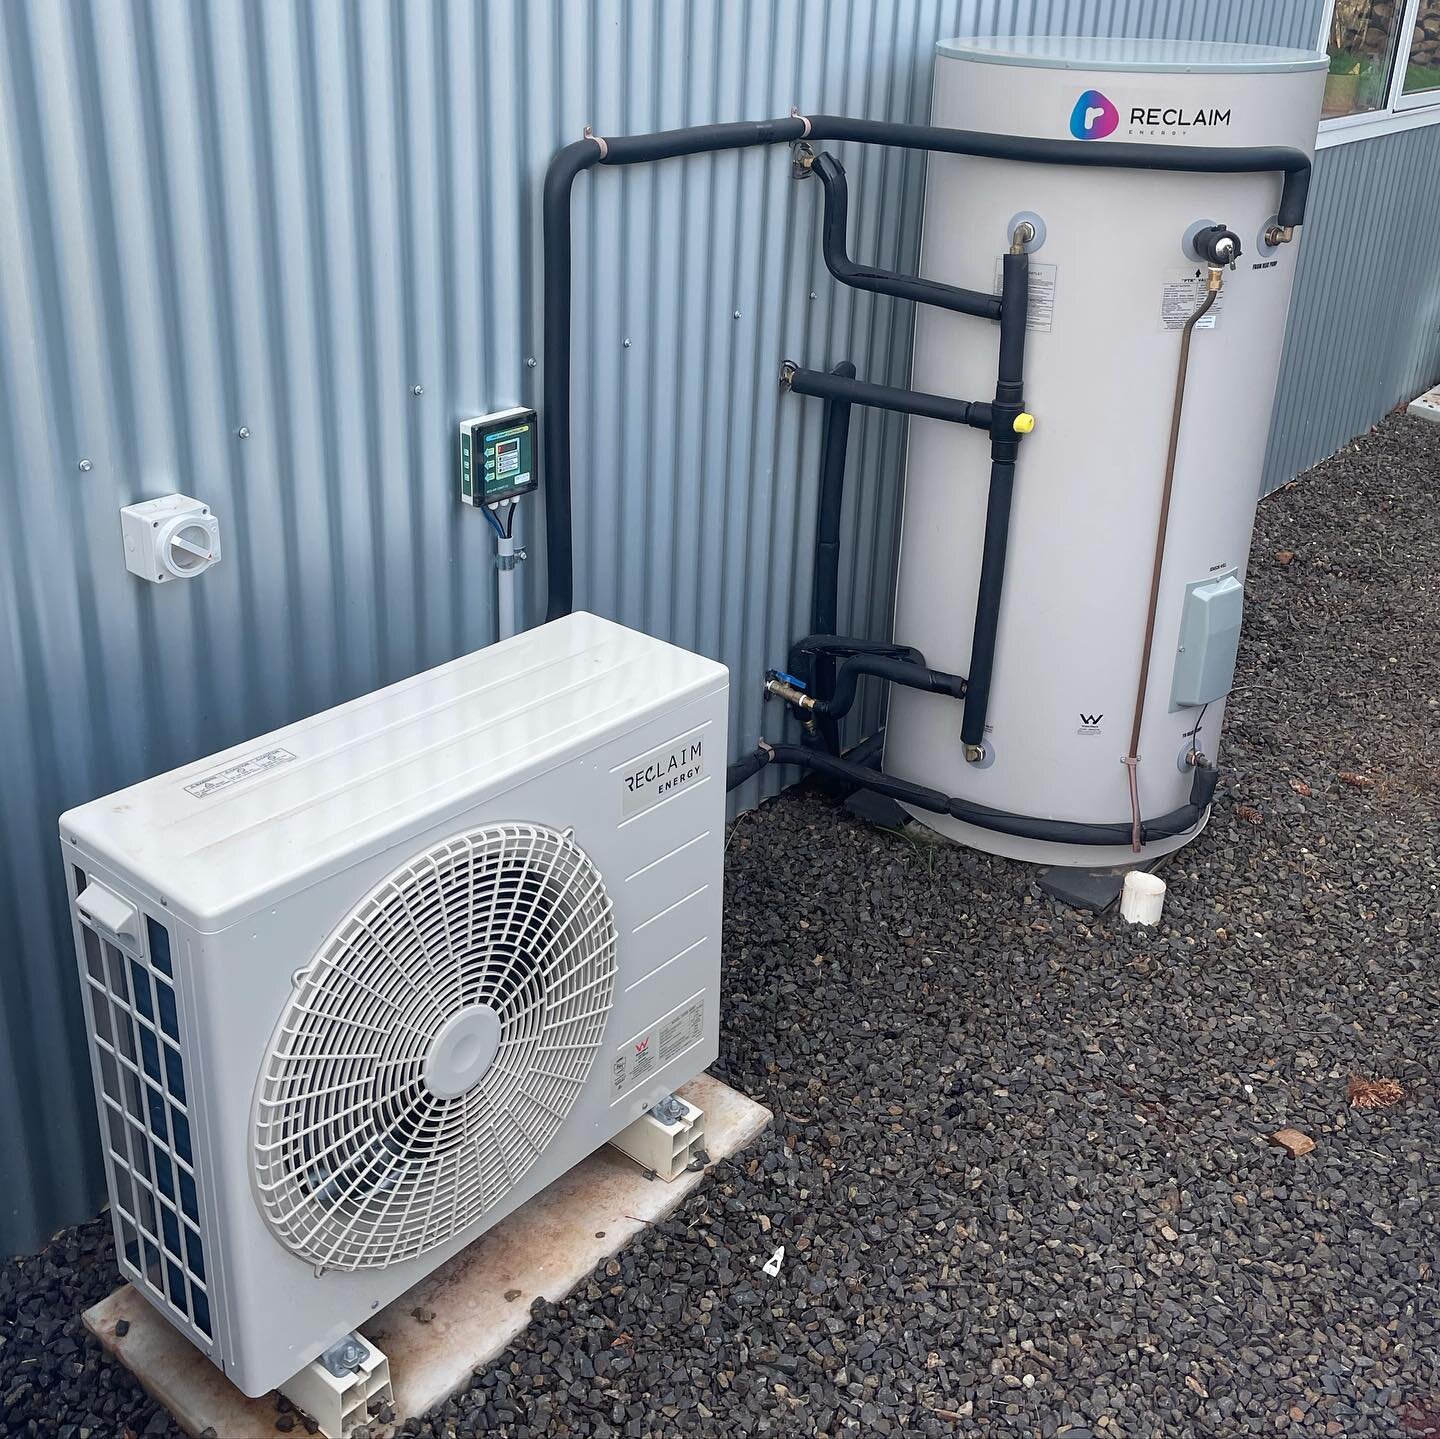 #getoffgas with heat pumps. 300%+ more efficient than resistive electric and gas boiler set ups. This will save you in operating costs and save the environment we want to protect for generations to come.